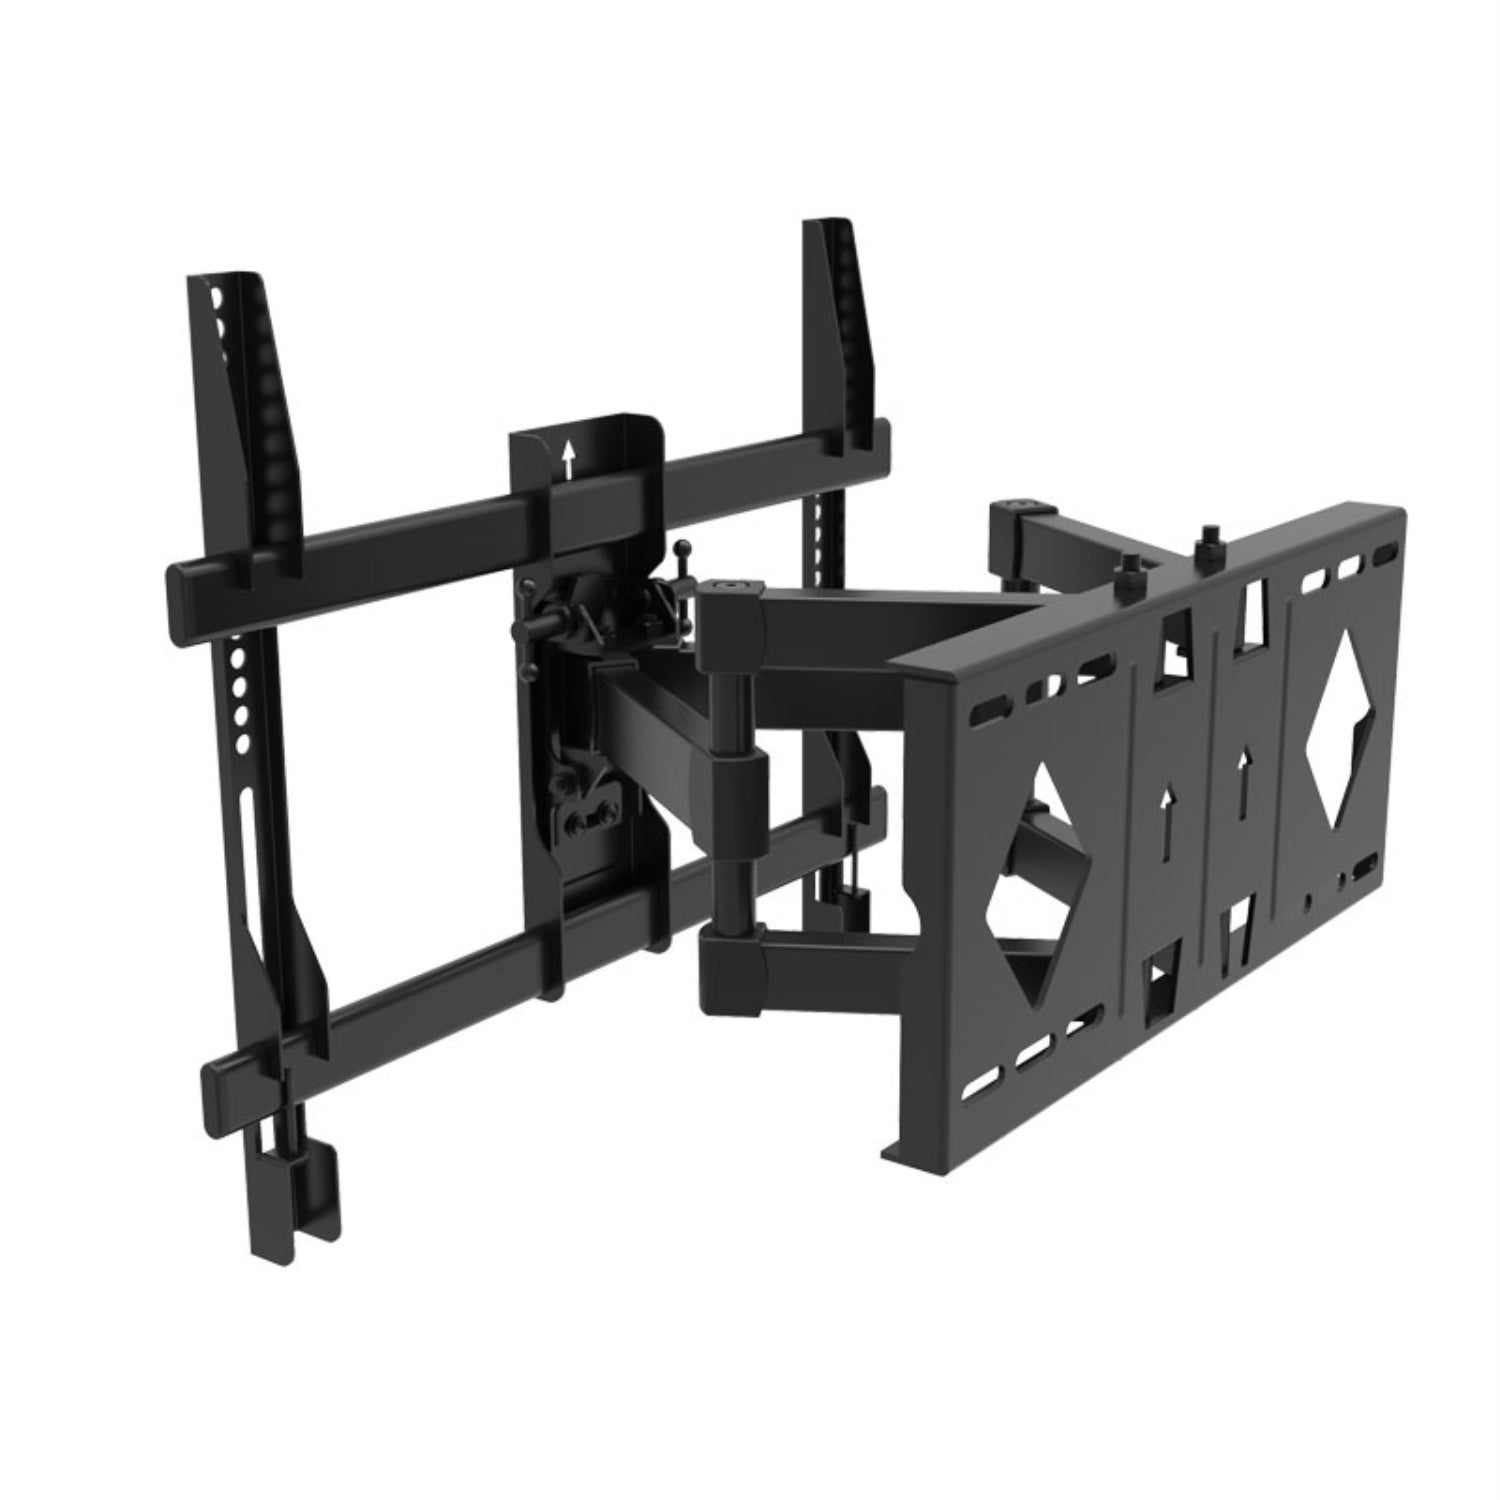 ViscoLogic Clench Adjustable Articulating TV Wall Mount Suitable for 32" - 65" TV's